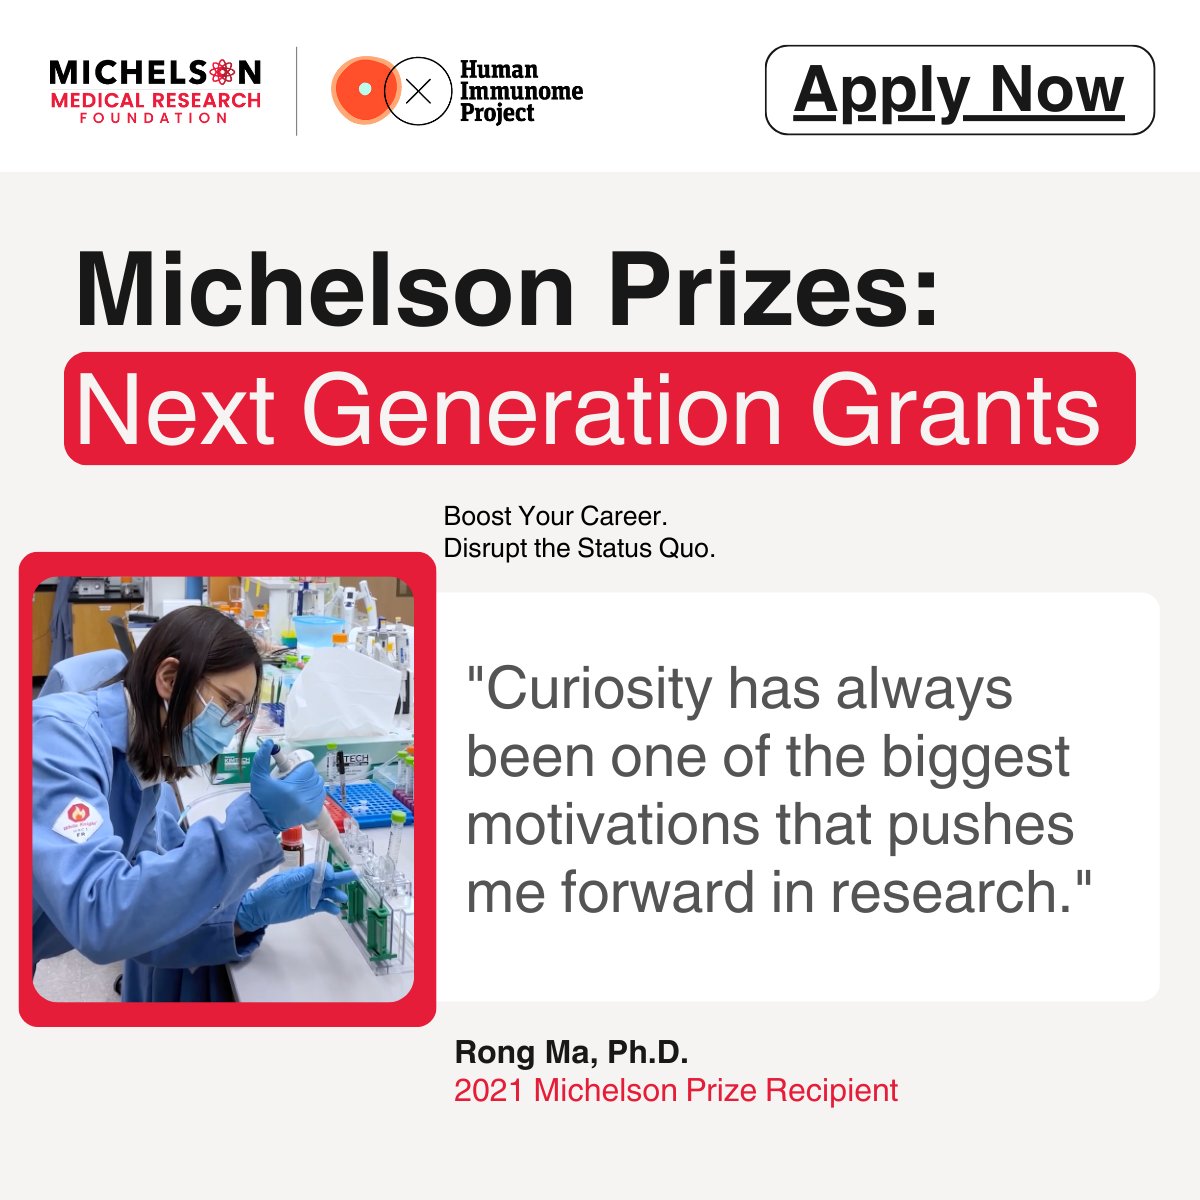 2021 #MichelsonPrizes: Next Generation Grant recipient, Dr. Rong Ma, harnessed mechanotechnology to advance vaccine development and personalize cancer treatment. If you're a early-career immunologist, consider applying for our Next Generation Grant: michelsonprizes.smapply.org